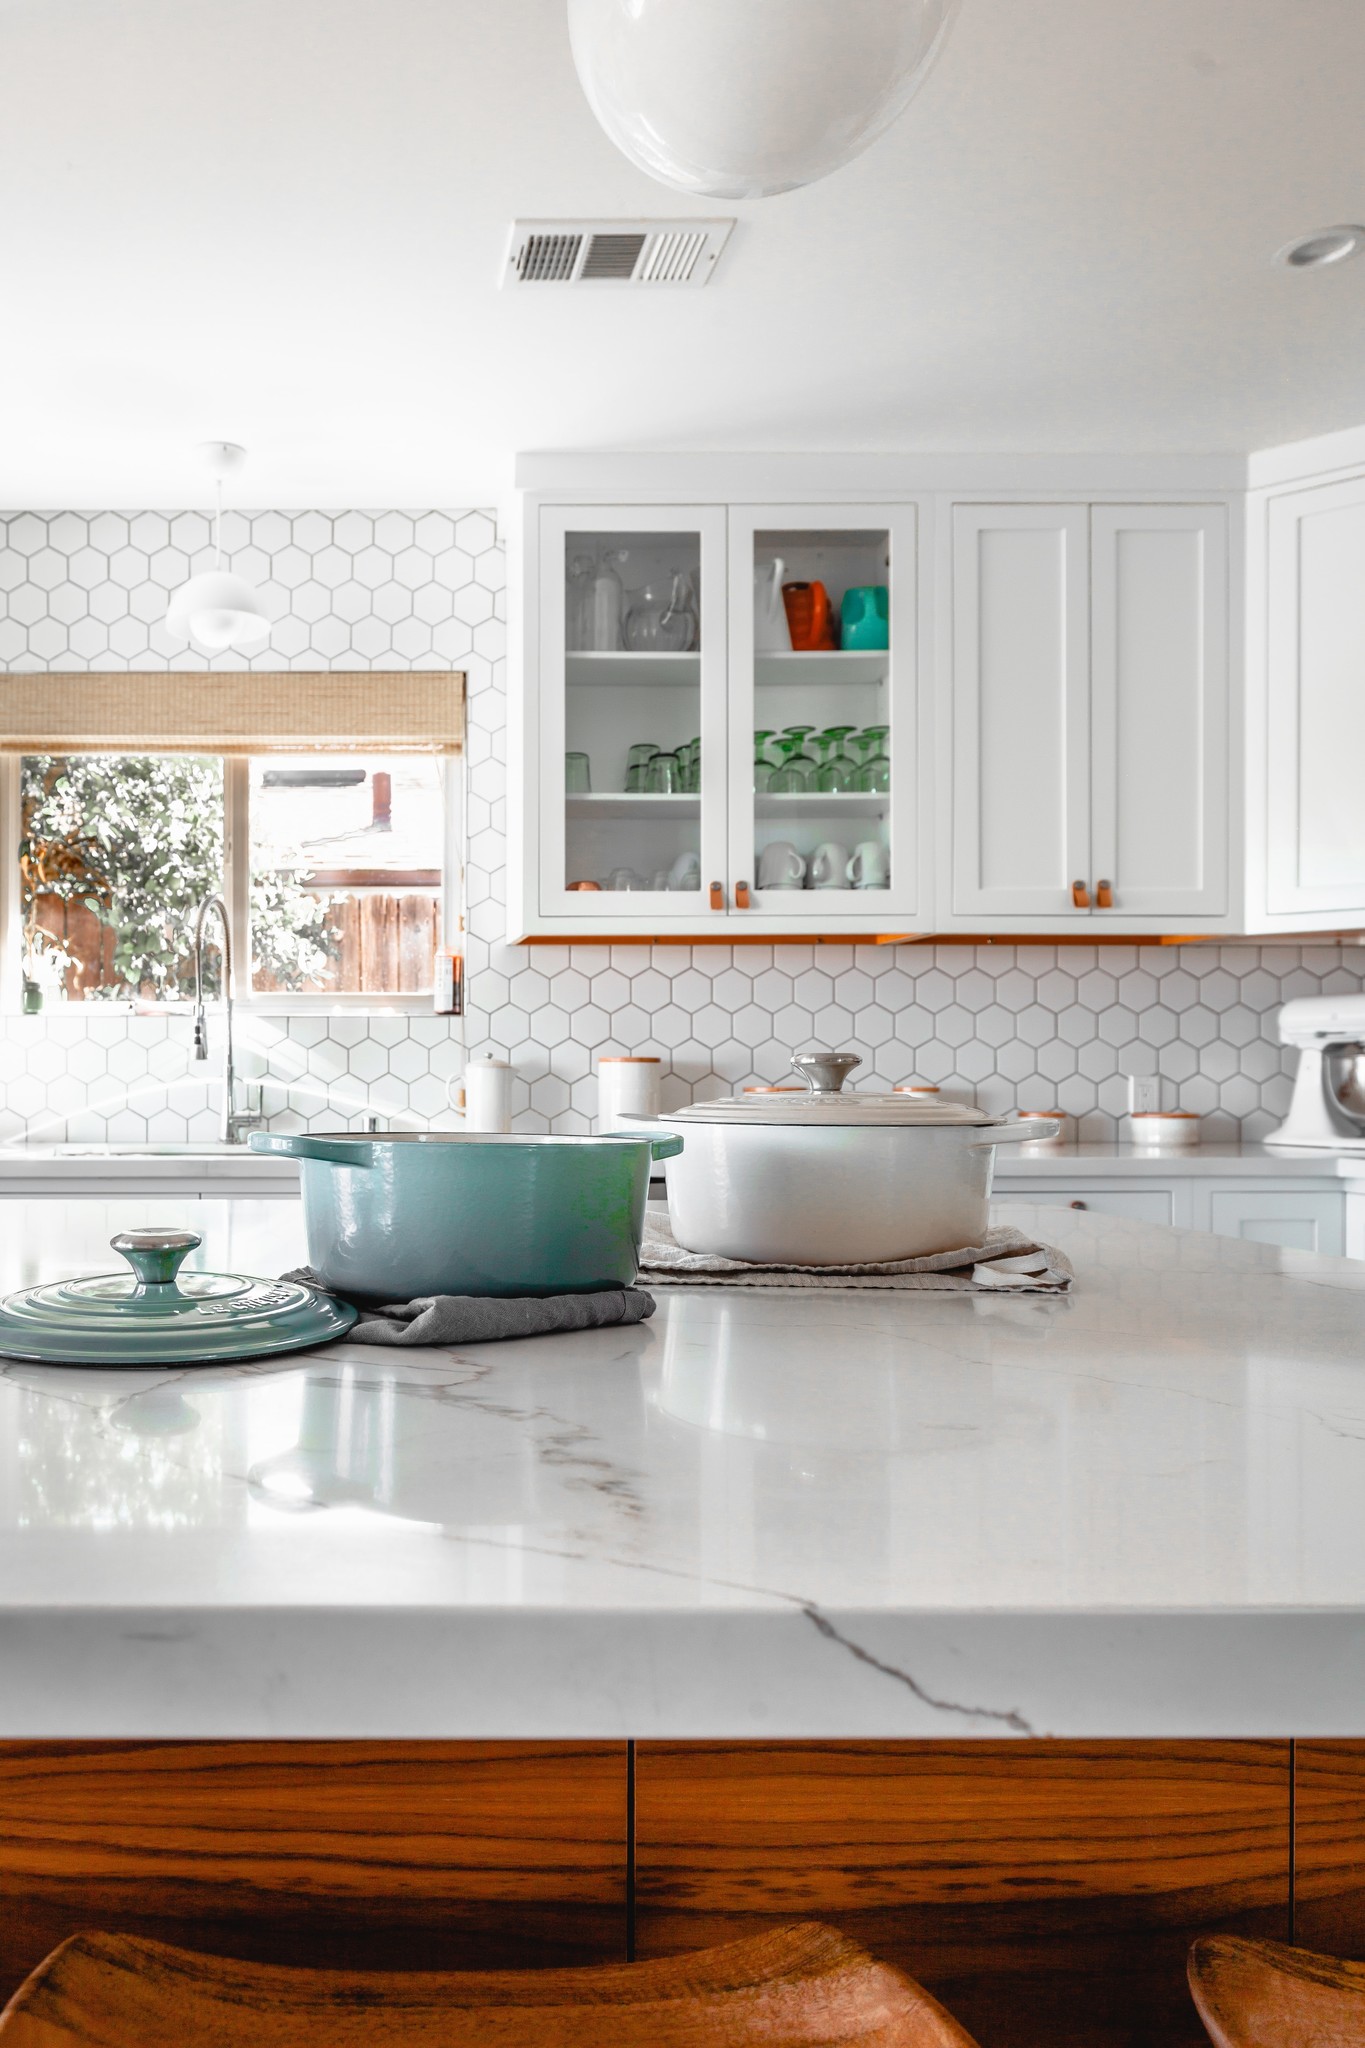 5 Easy Ways to Transform Your Kitchen in 2022